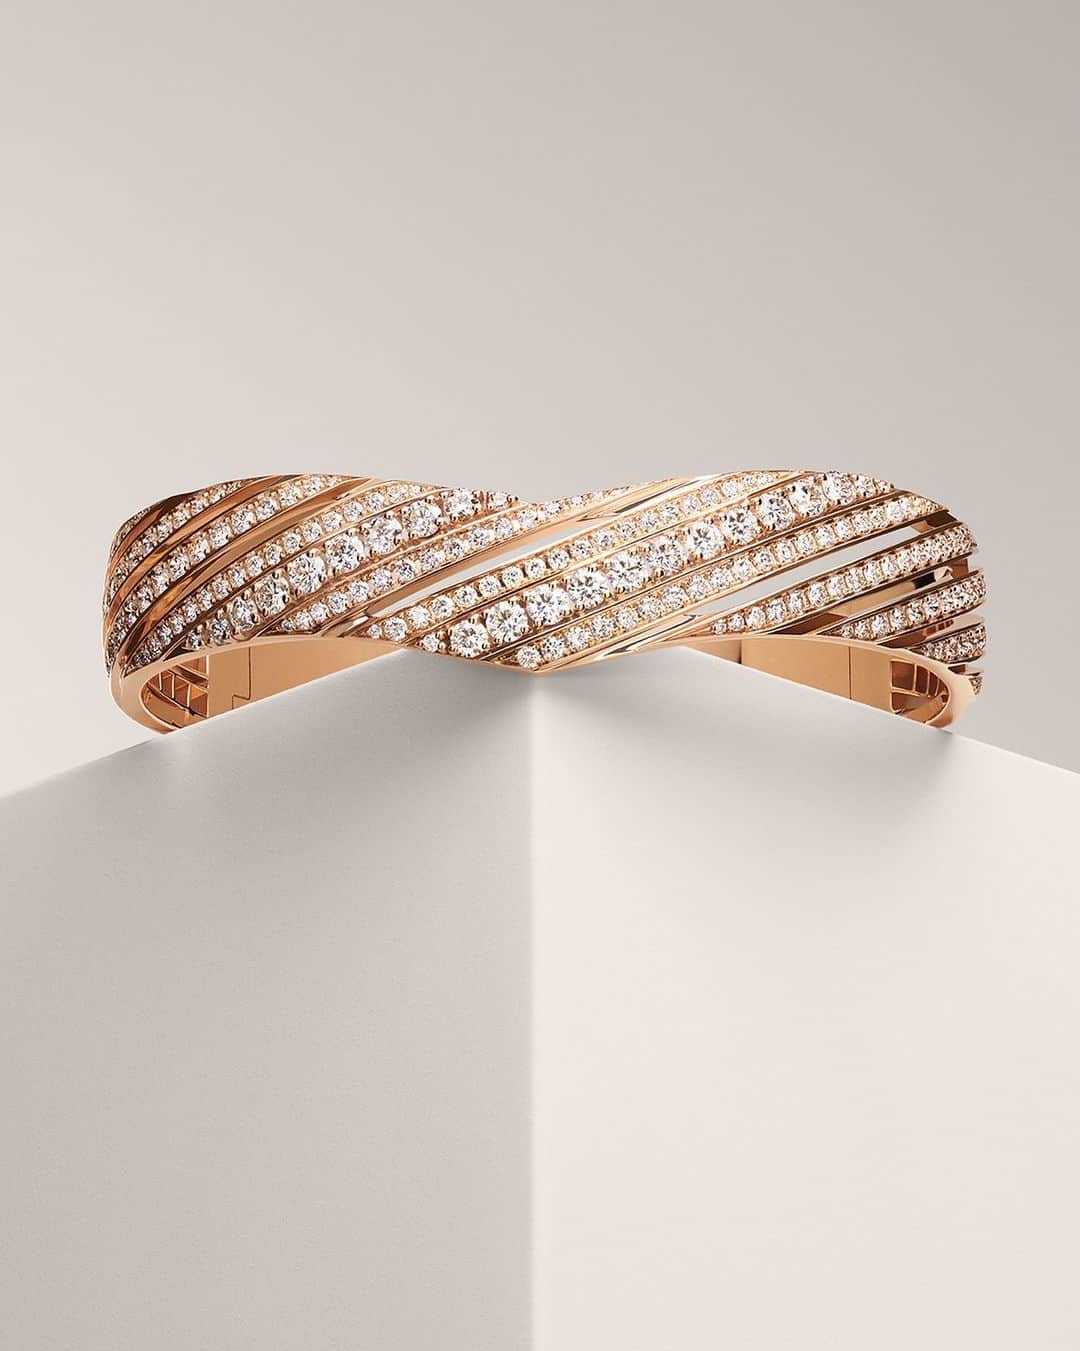 Chaumetのインスタグラム：「Wrap your wrist in radiance with the new Joséphine Aigrette bracelet in rose gold, sprinkled with brilliant-cut diamonds.  Chaumet's precious take on its iconic V-shaped aigrette motif adds a touch of striking elegance to your style.  #Chaumet #MyCrownMyWay #DoItLikeJosephine」